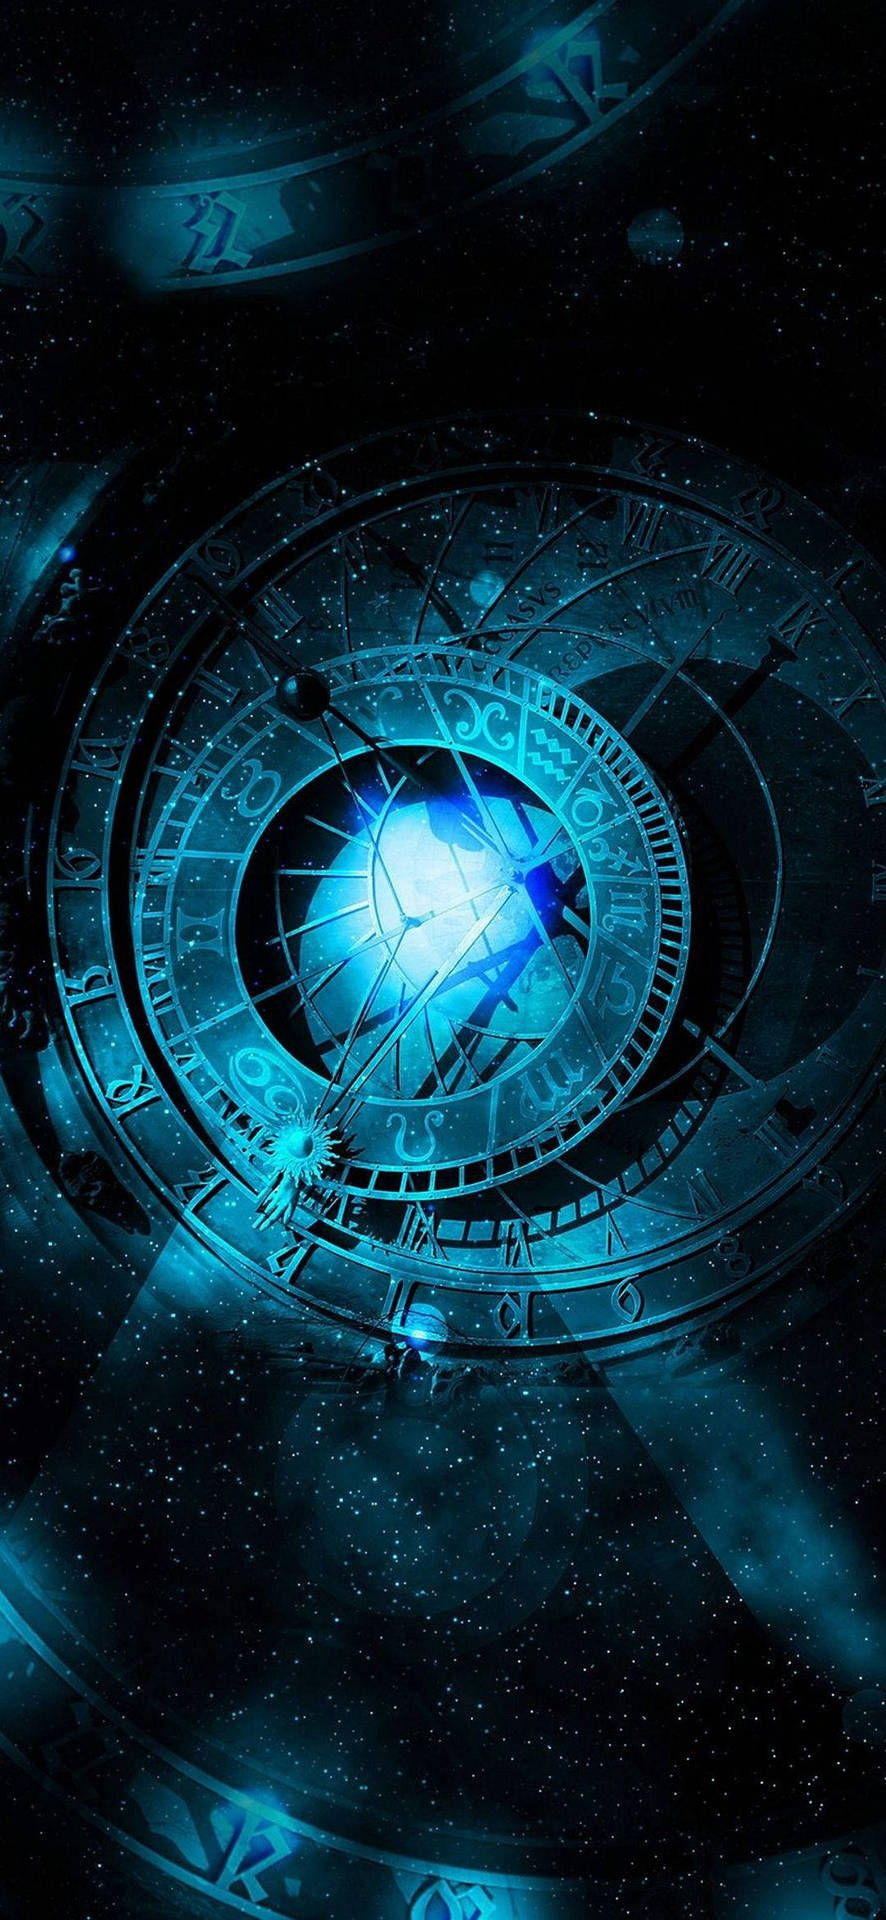 Mystical Astrological Compass Picture